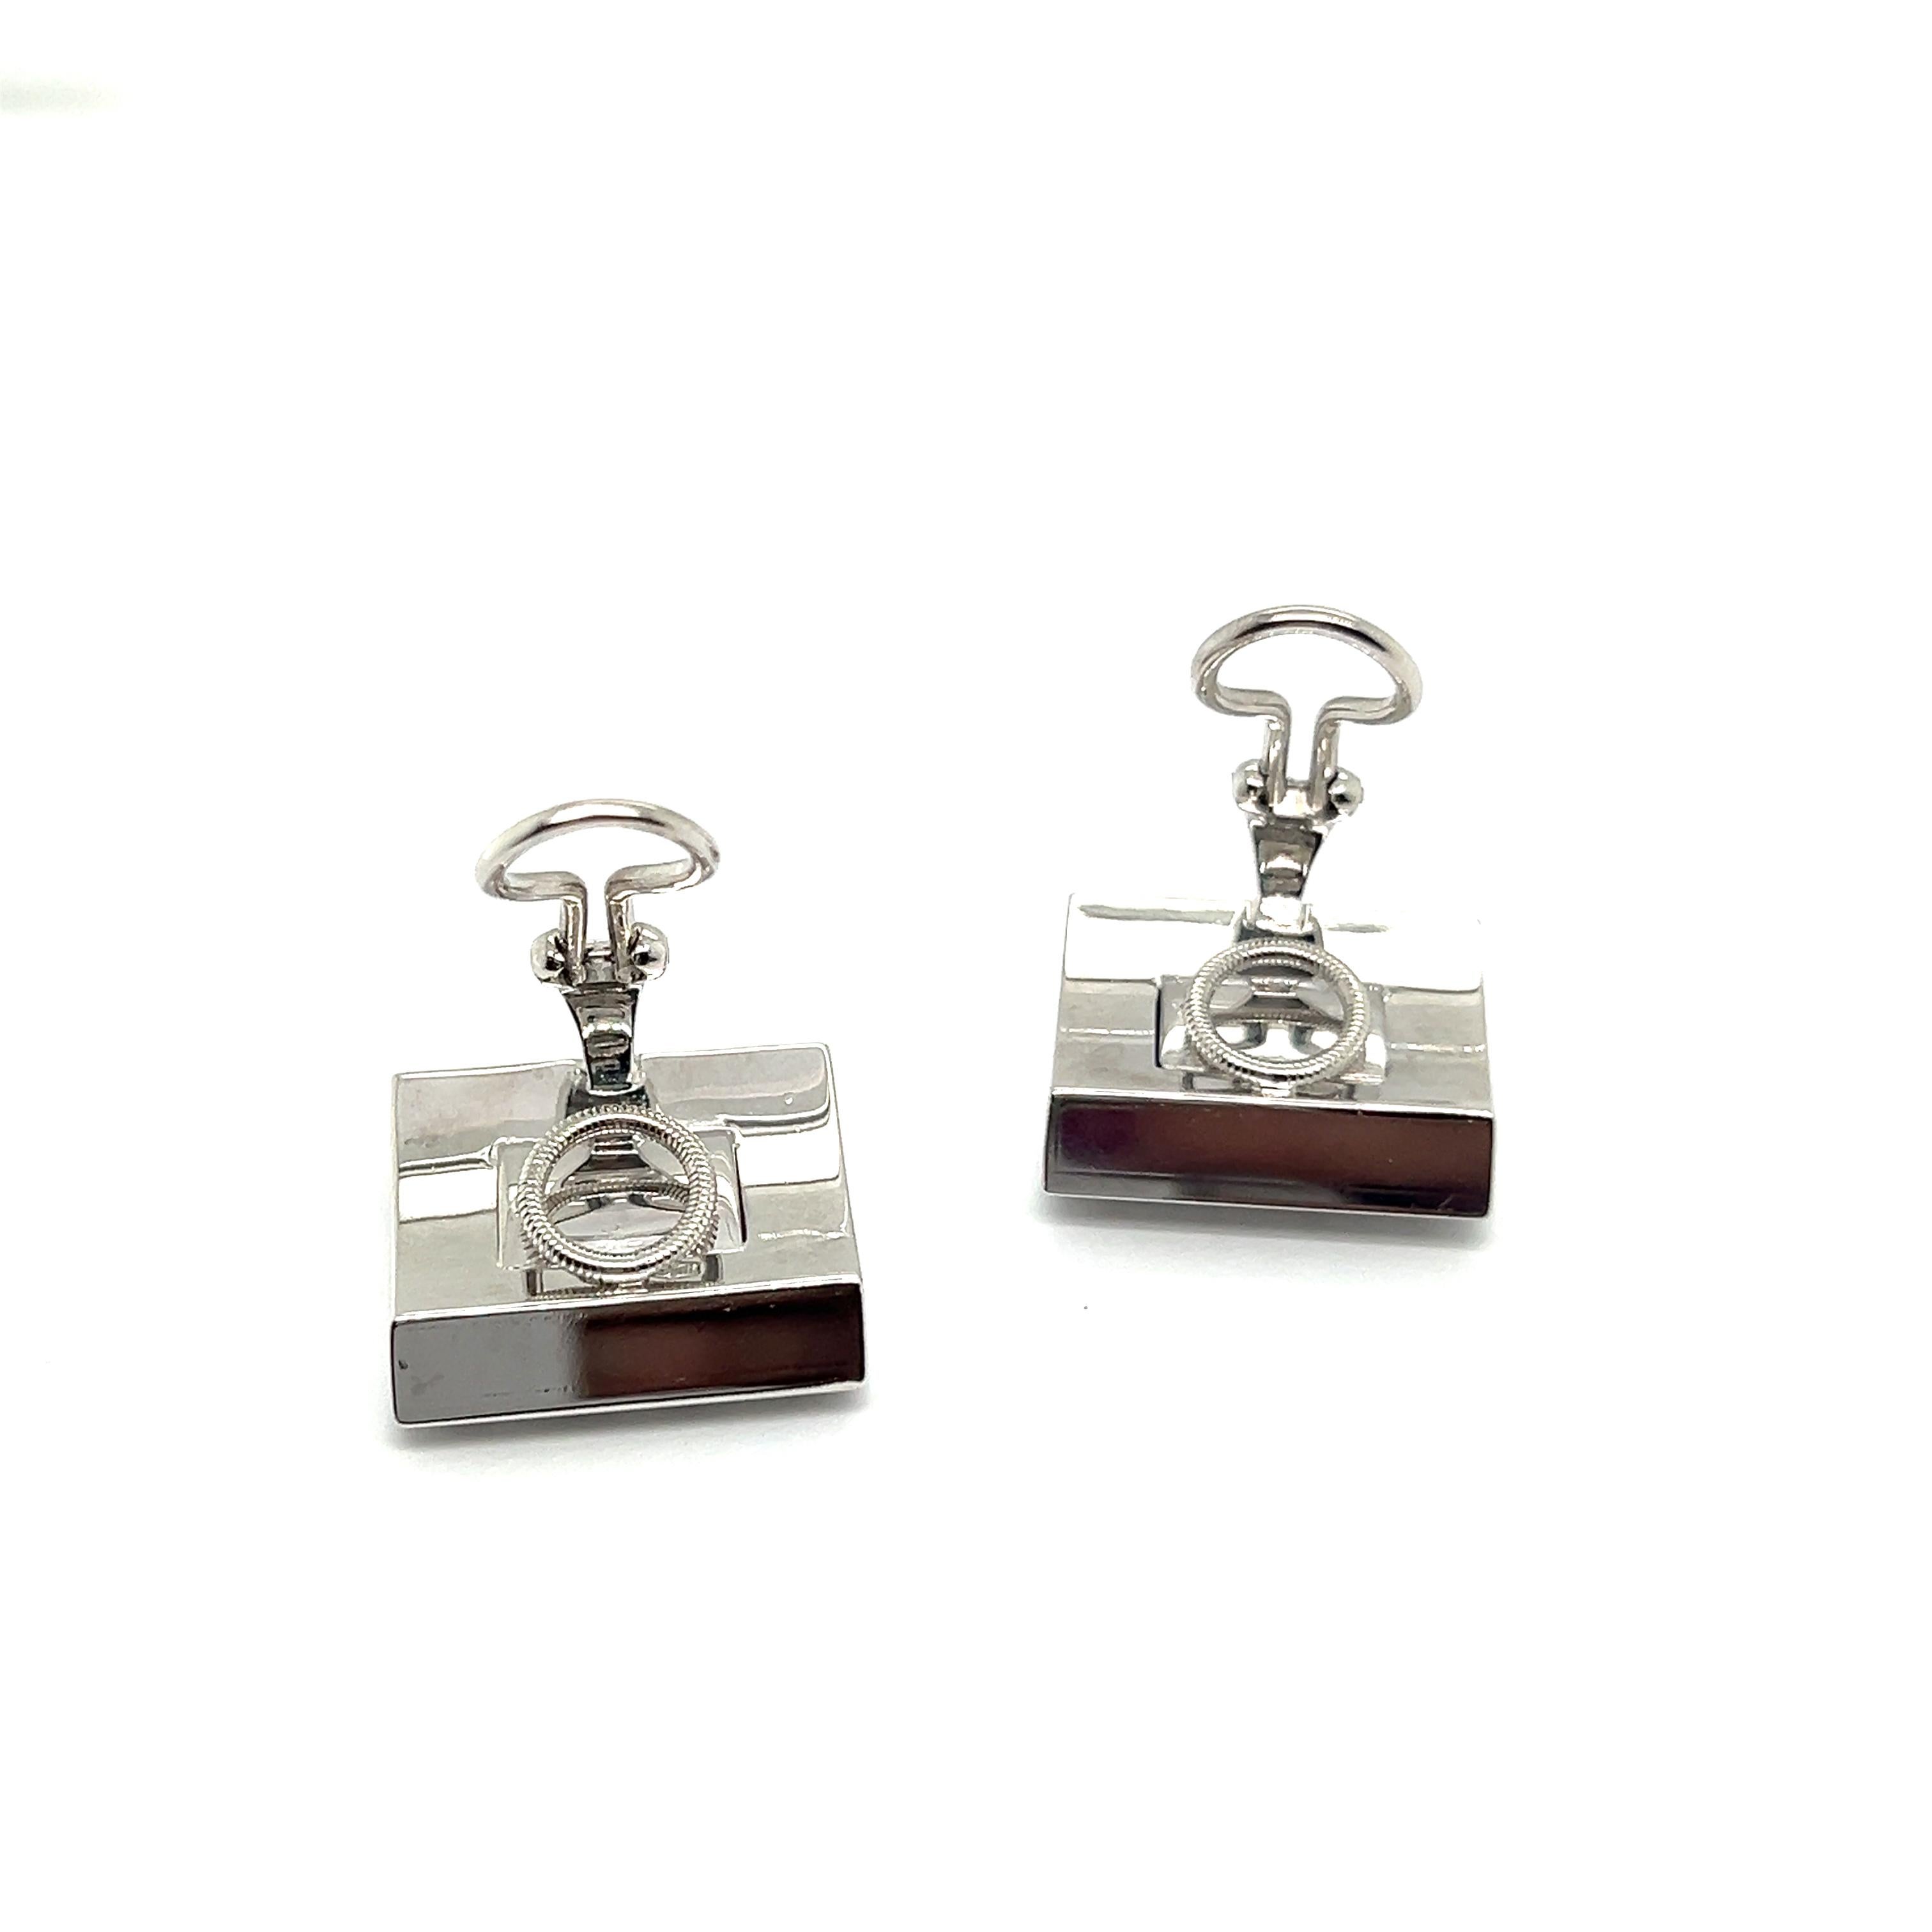  Bold Graphic Earrings with Diamonds in 18 Karat White Gold by Majo Fruithof For Sale 4